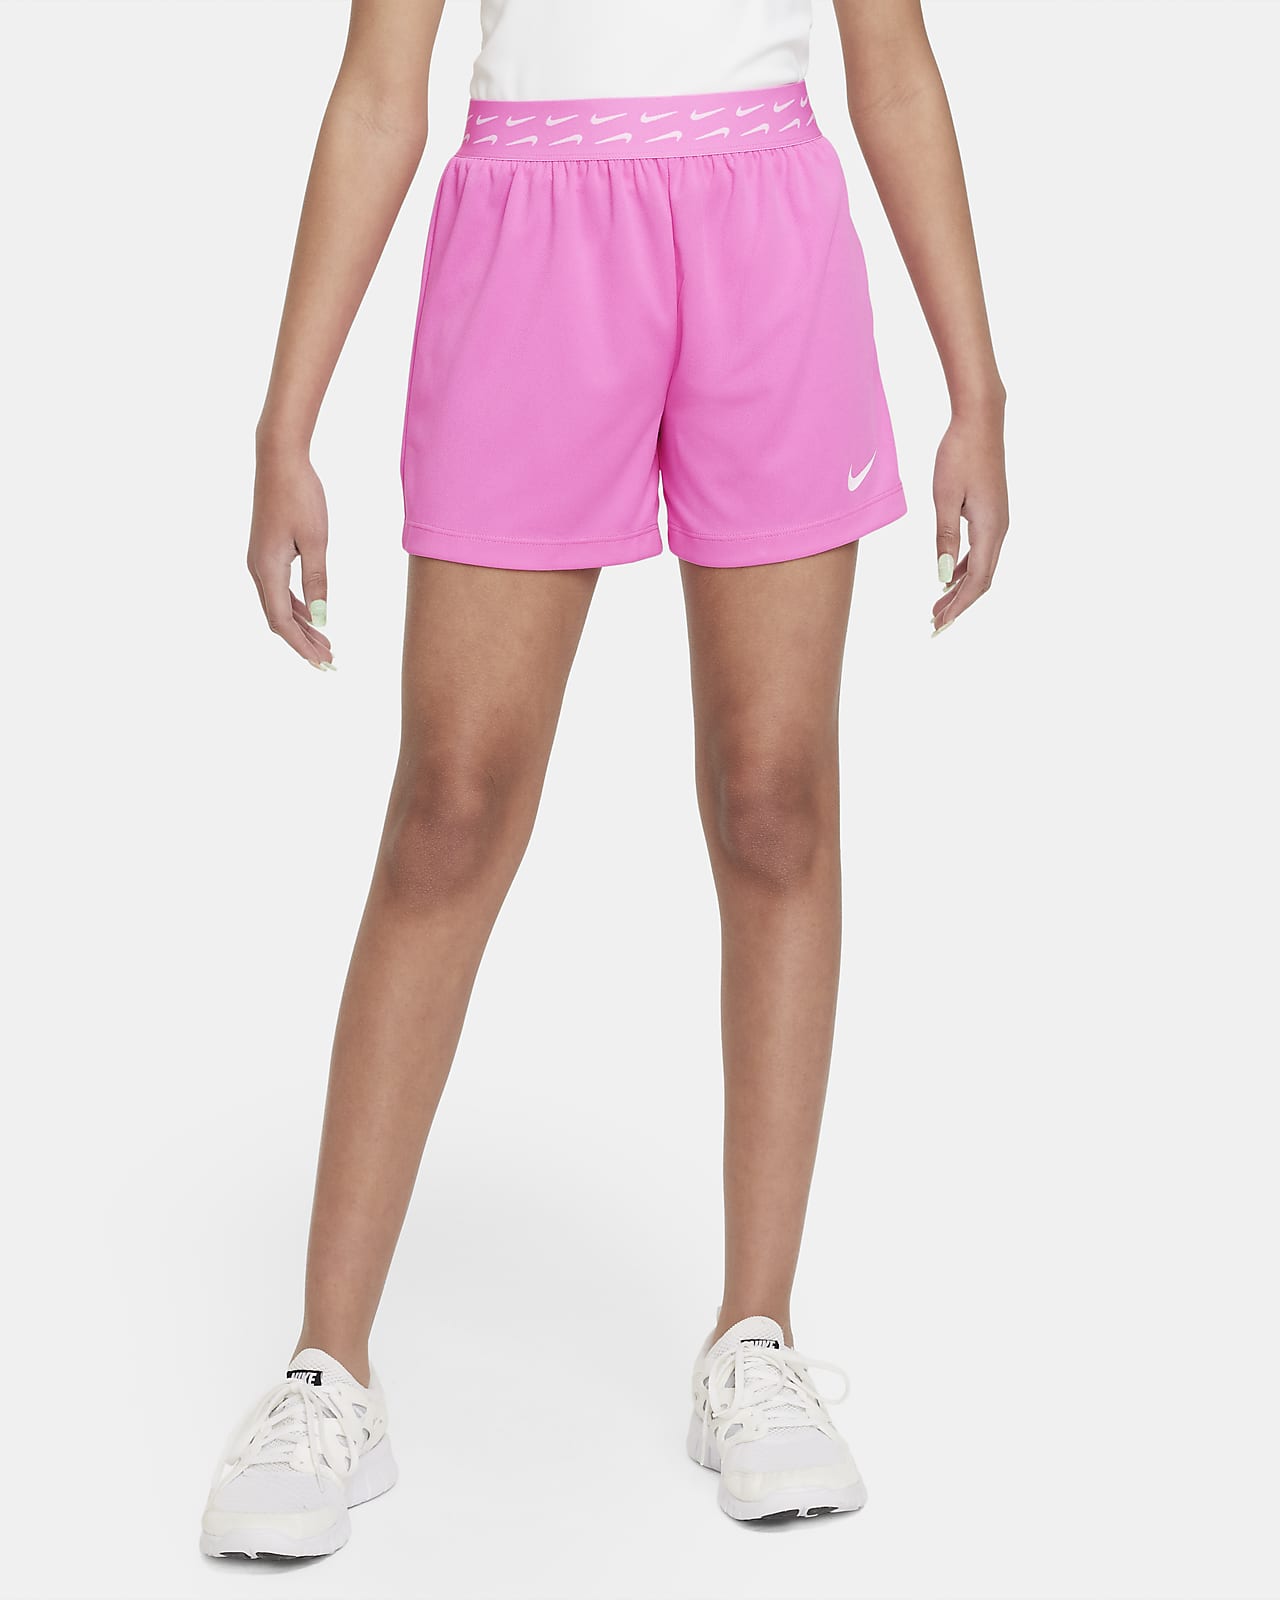 Girls Nike Athletic Shorts - Youth Size L - baby & kid stuff - by